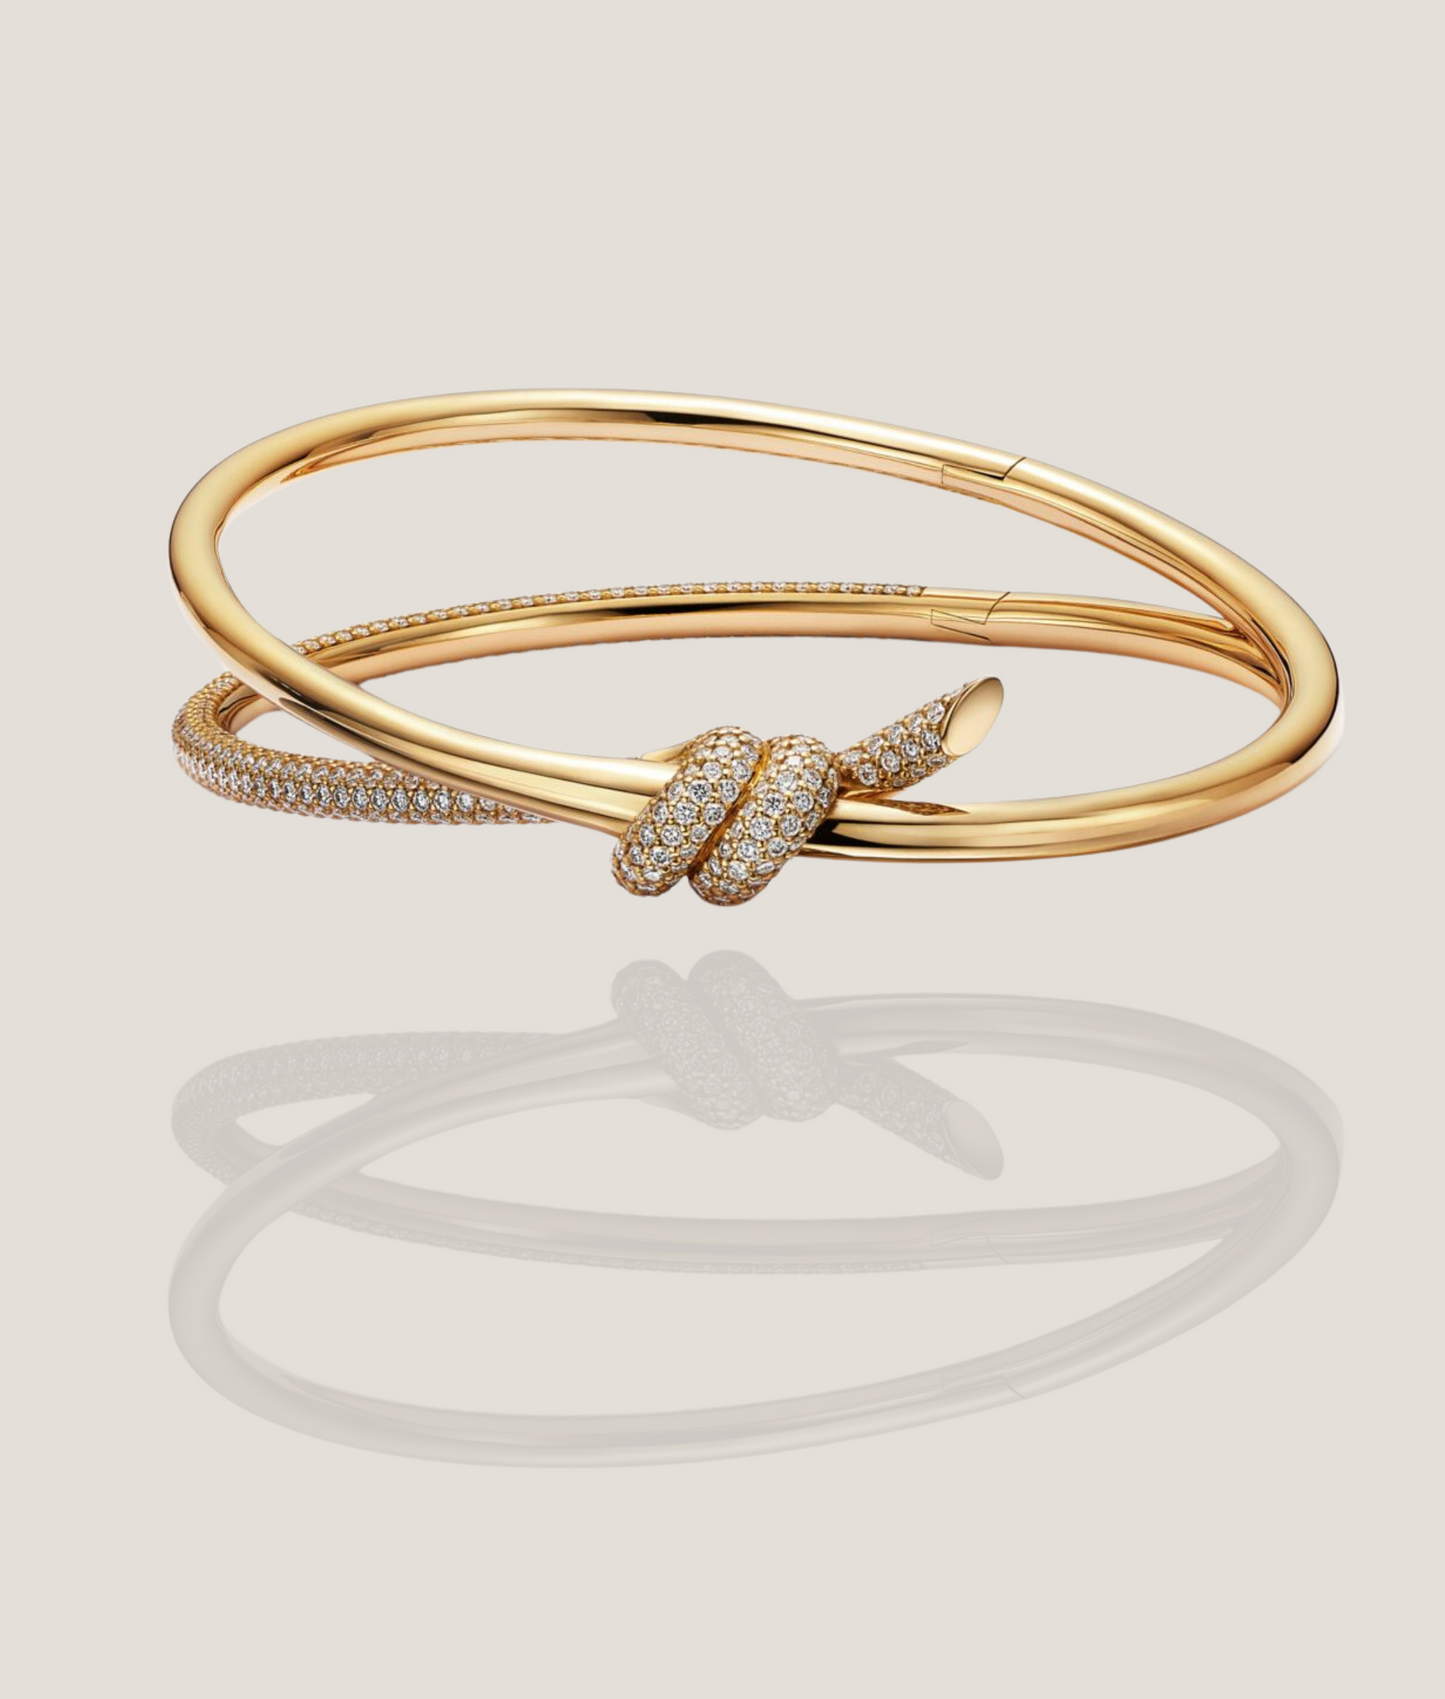 18K Solid Gold Knot Bangle